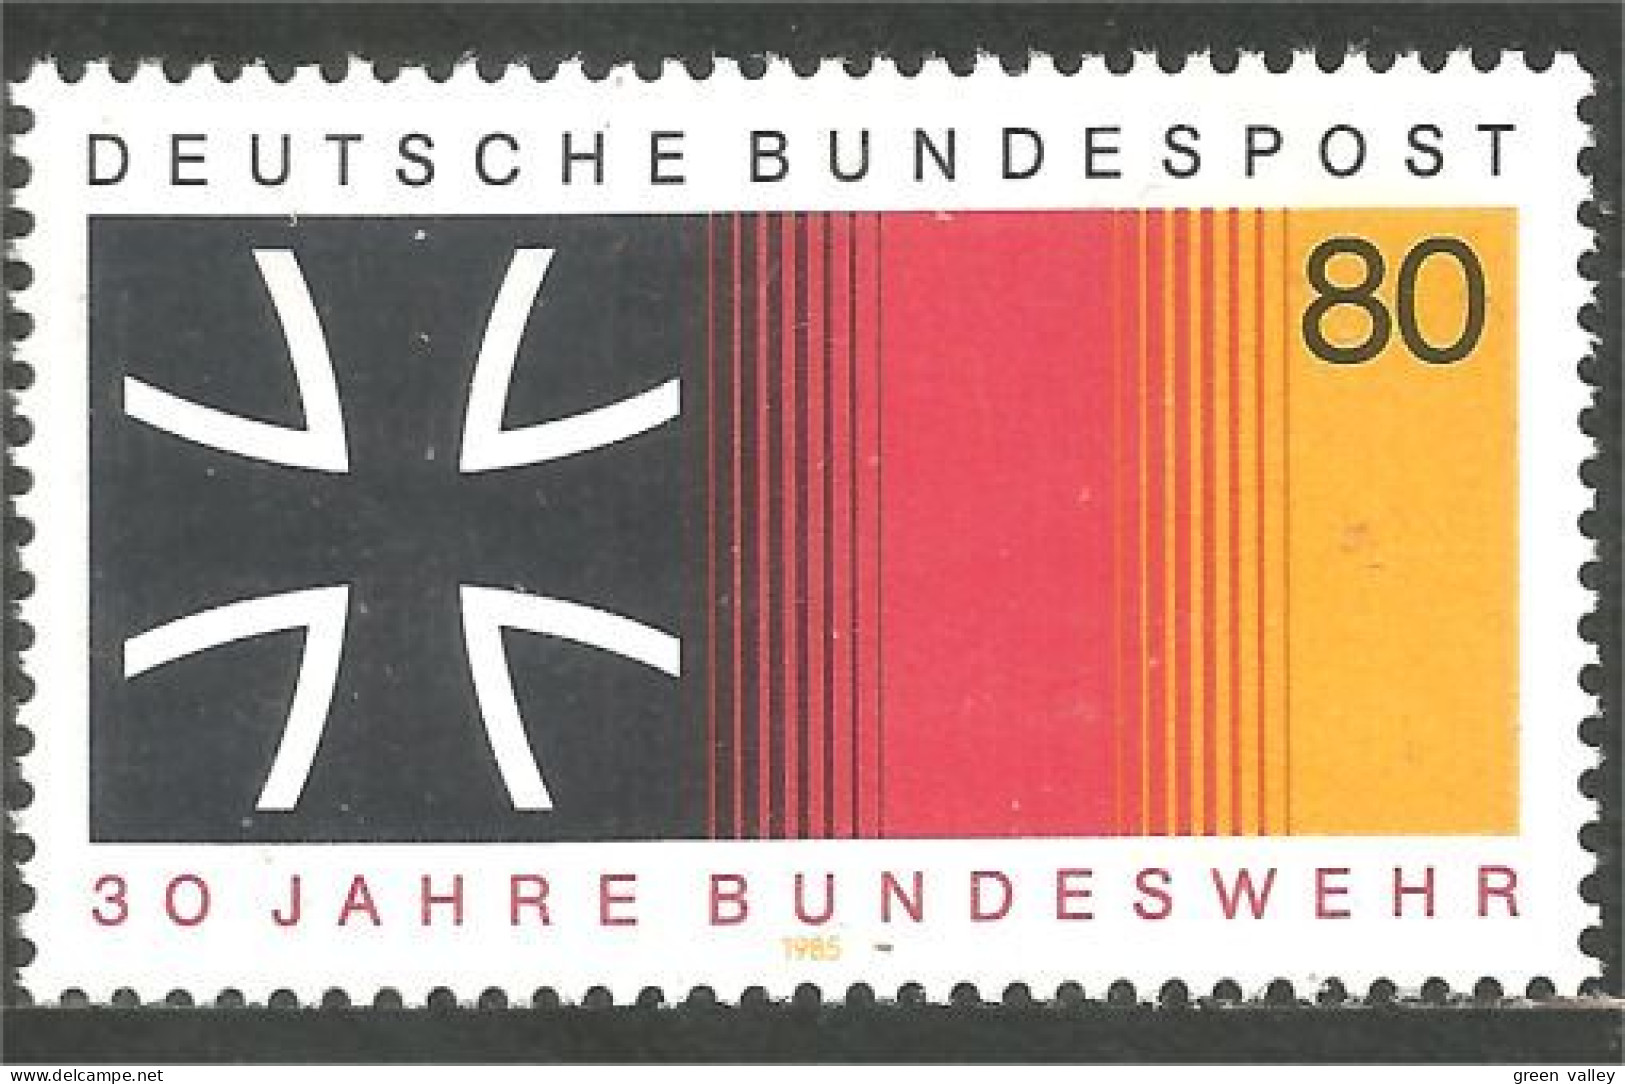 446 Germany Médaille Croix Fer Iron Cross Medal MNH ** Neuf SC (GEF-310) - Minerales